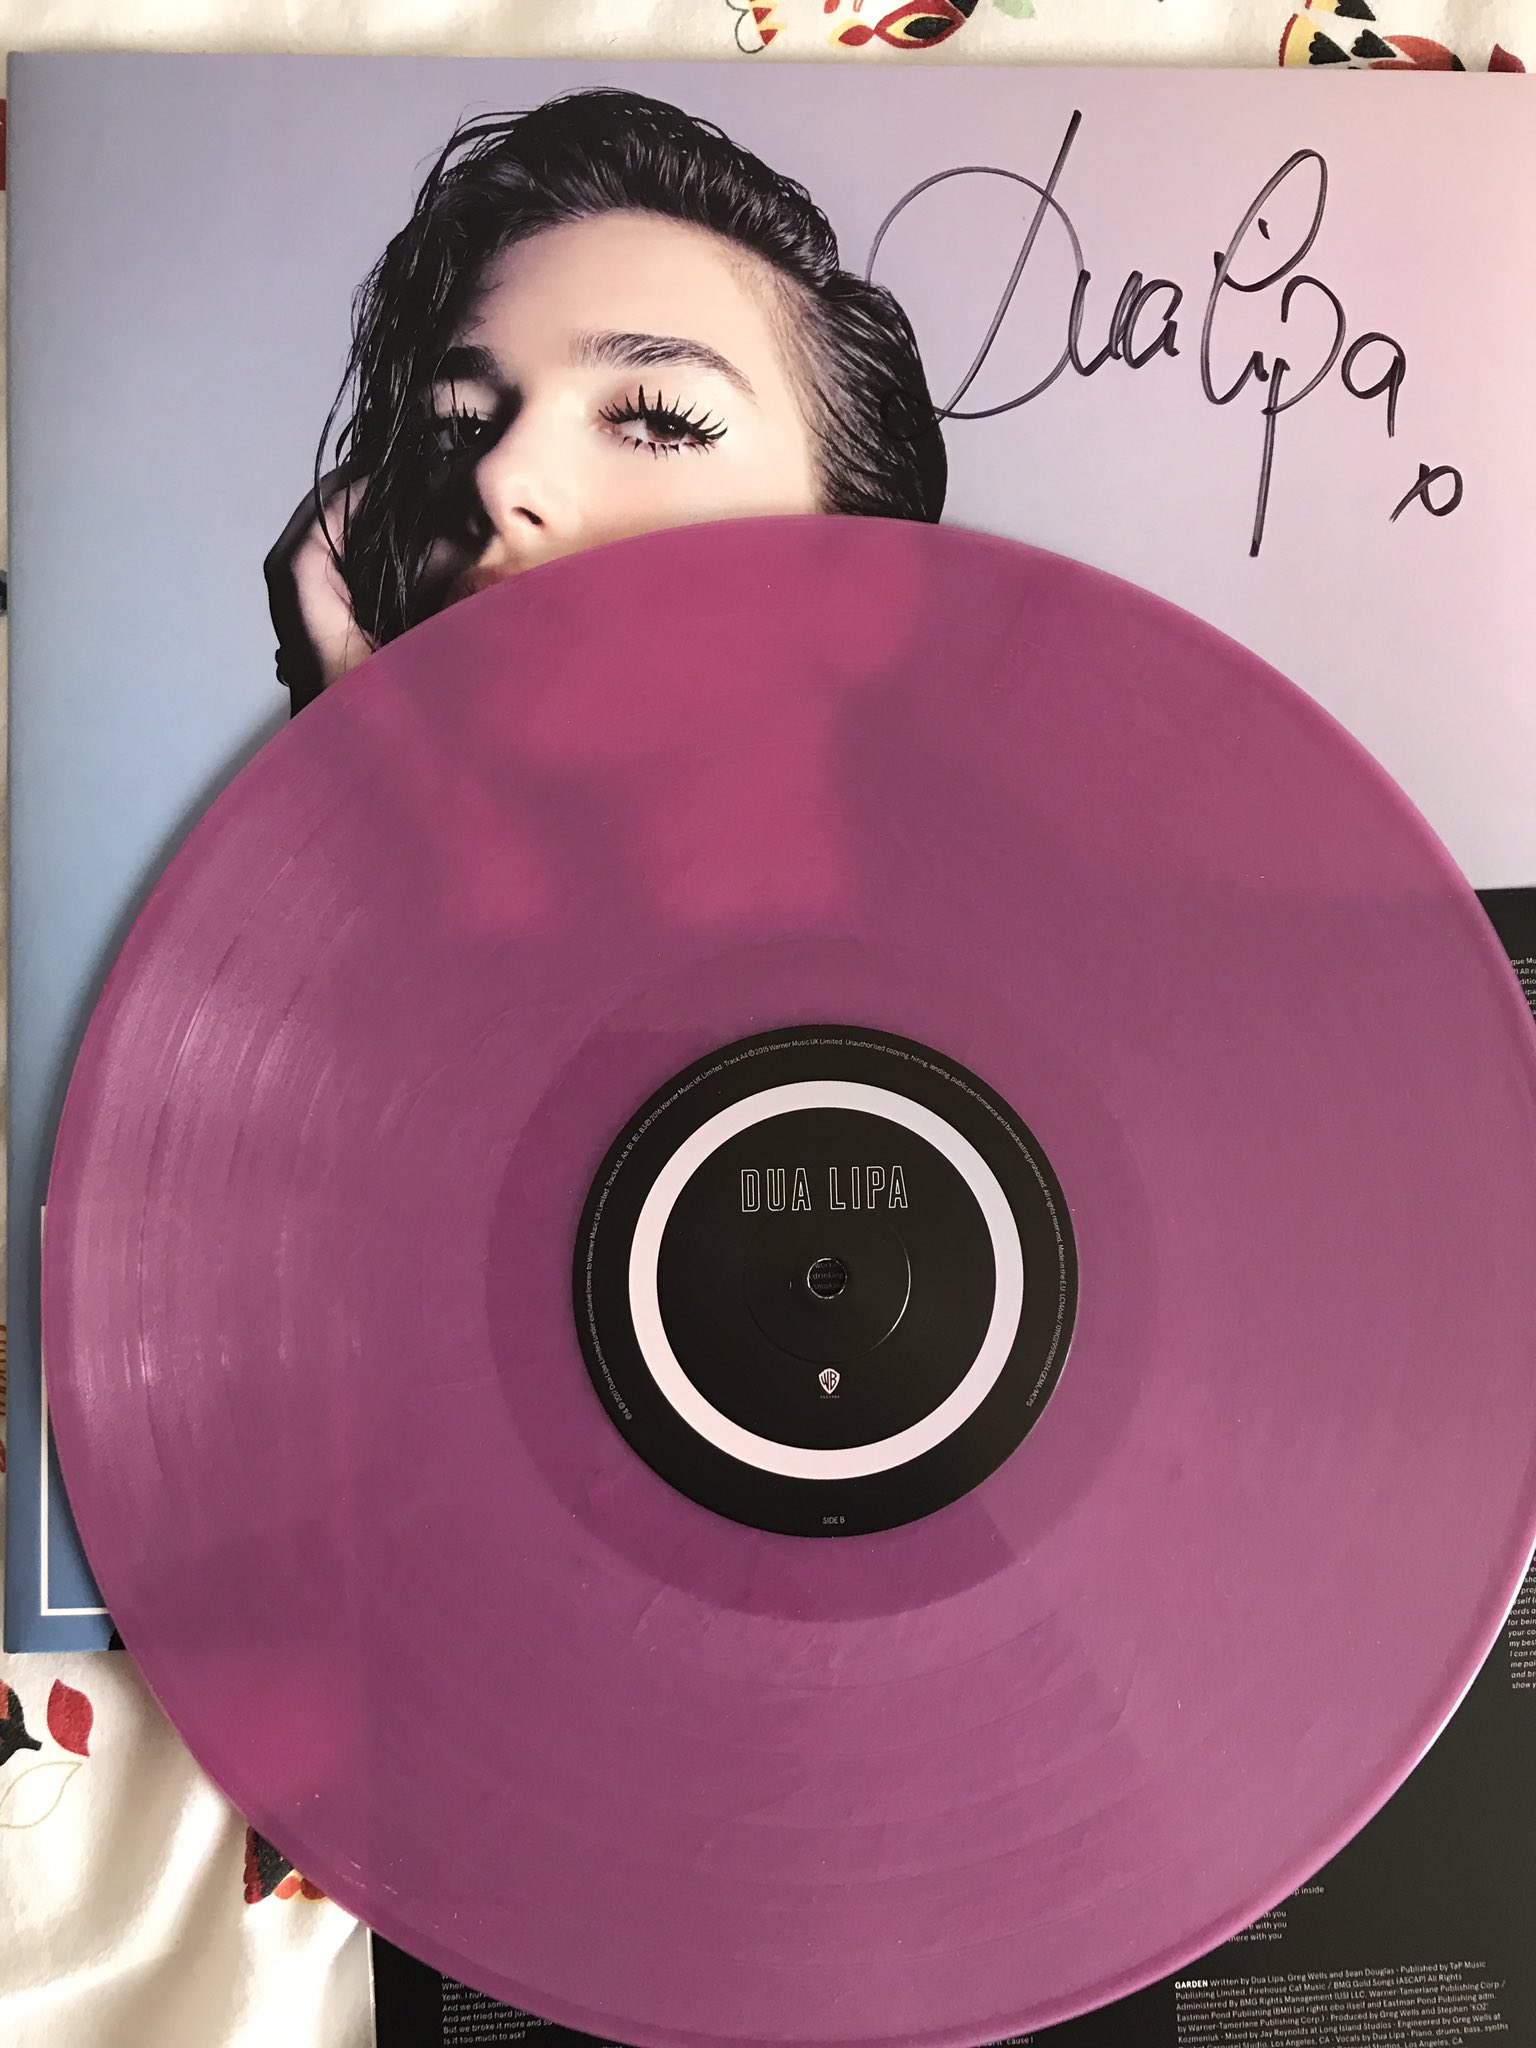 Personal Record Collection on Instagram: “Dua Lipa - Dua Lipa ◦ Standard  Edition ◦ Pressed On Pink Marbled Translucent …